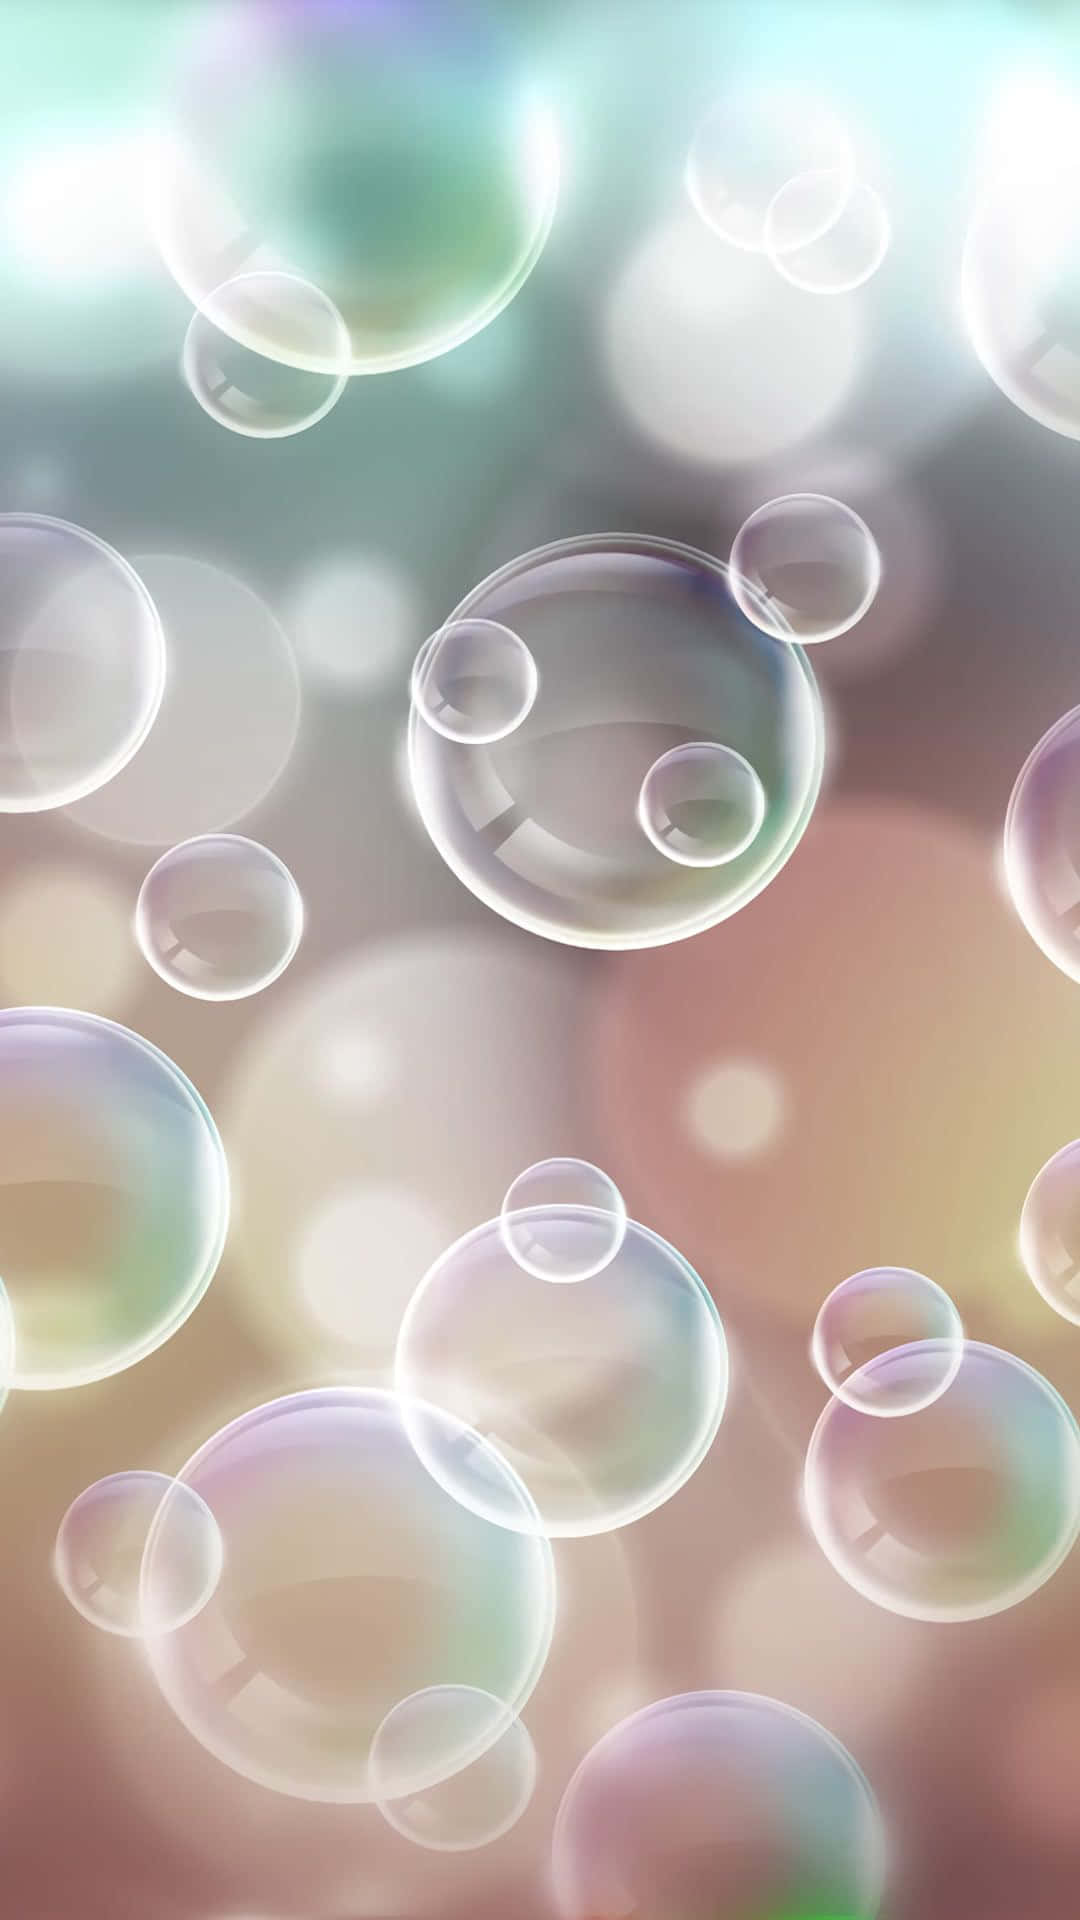 Search Results for ios bubbles wallpaper  Adorable Wallpapers  Bubbles  wallpaper Iphone wallpaper ios Iphone wallpaper